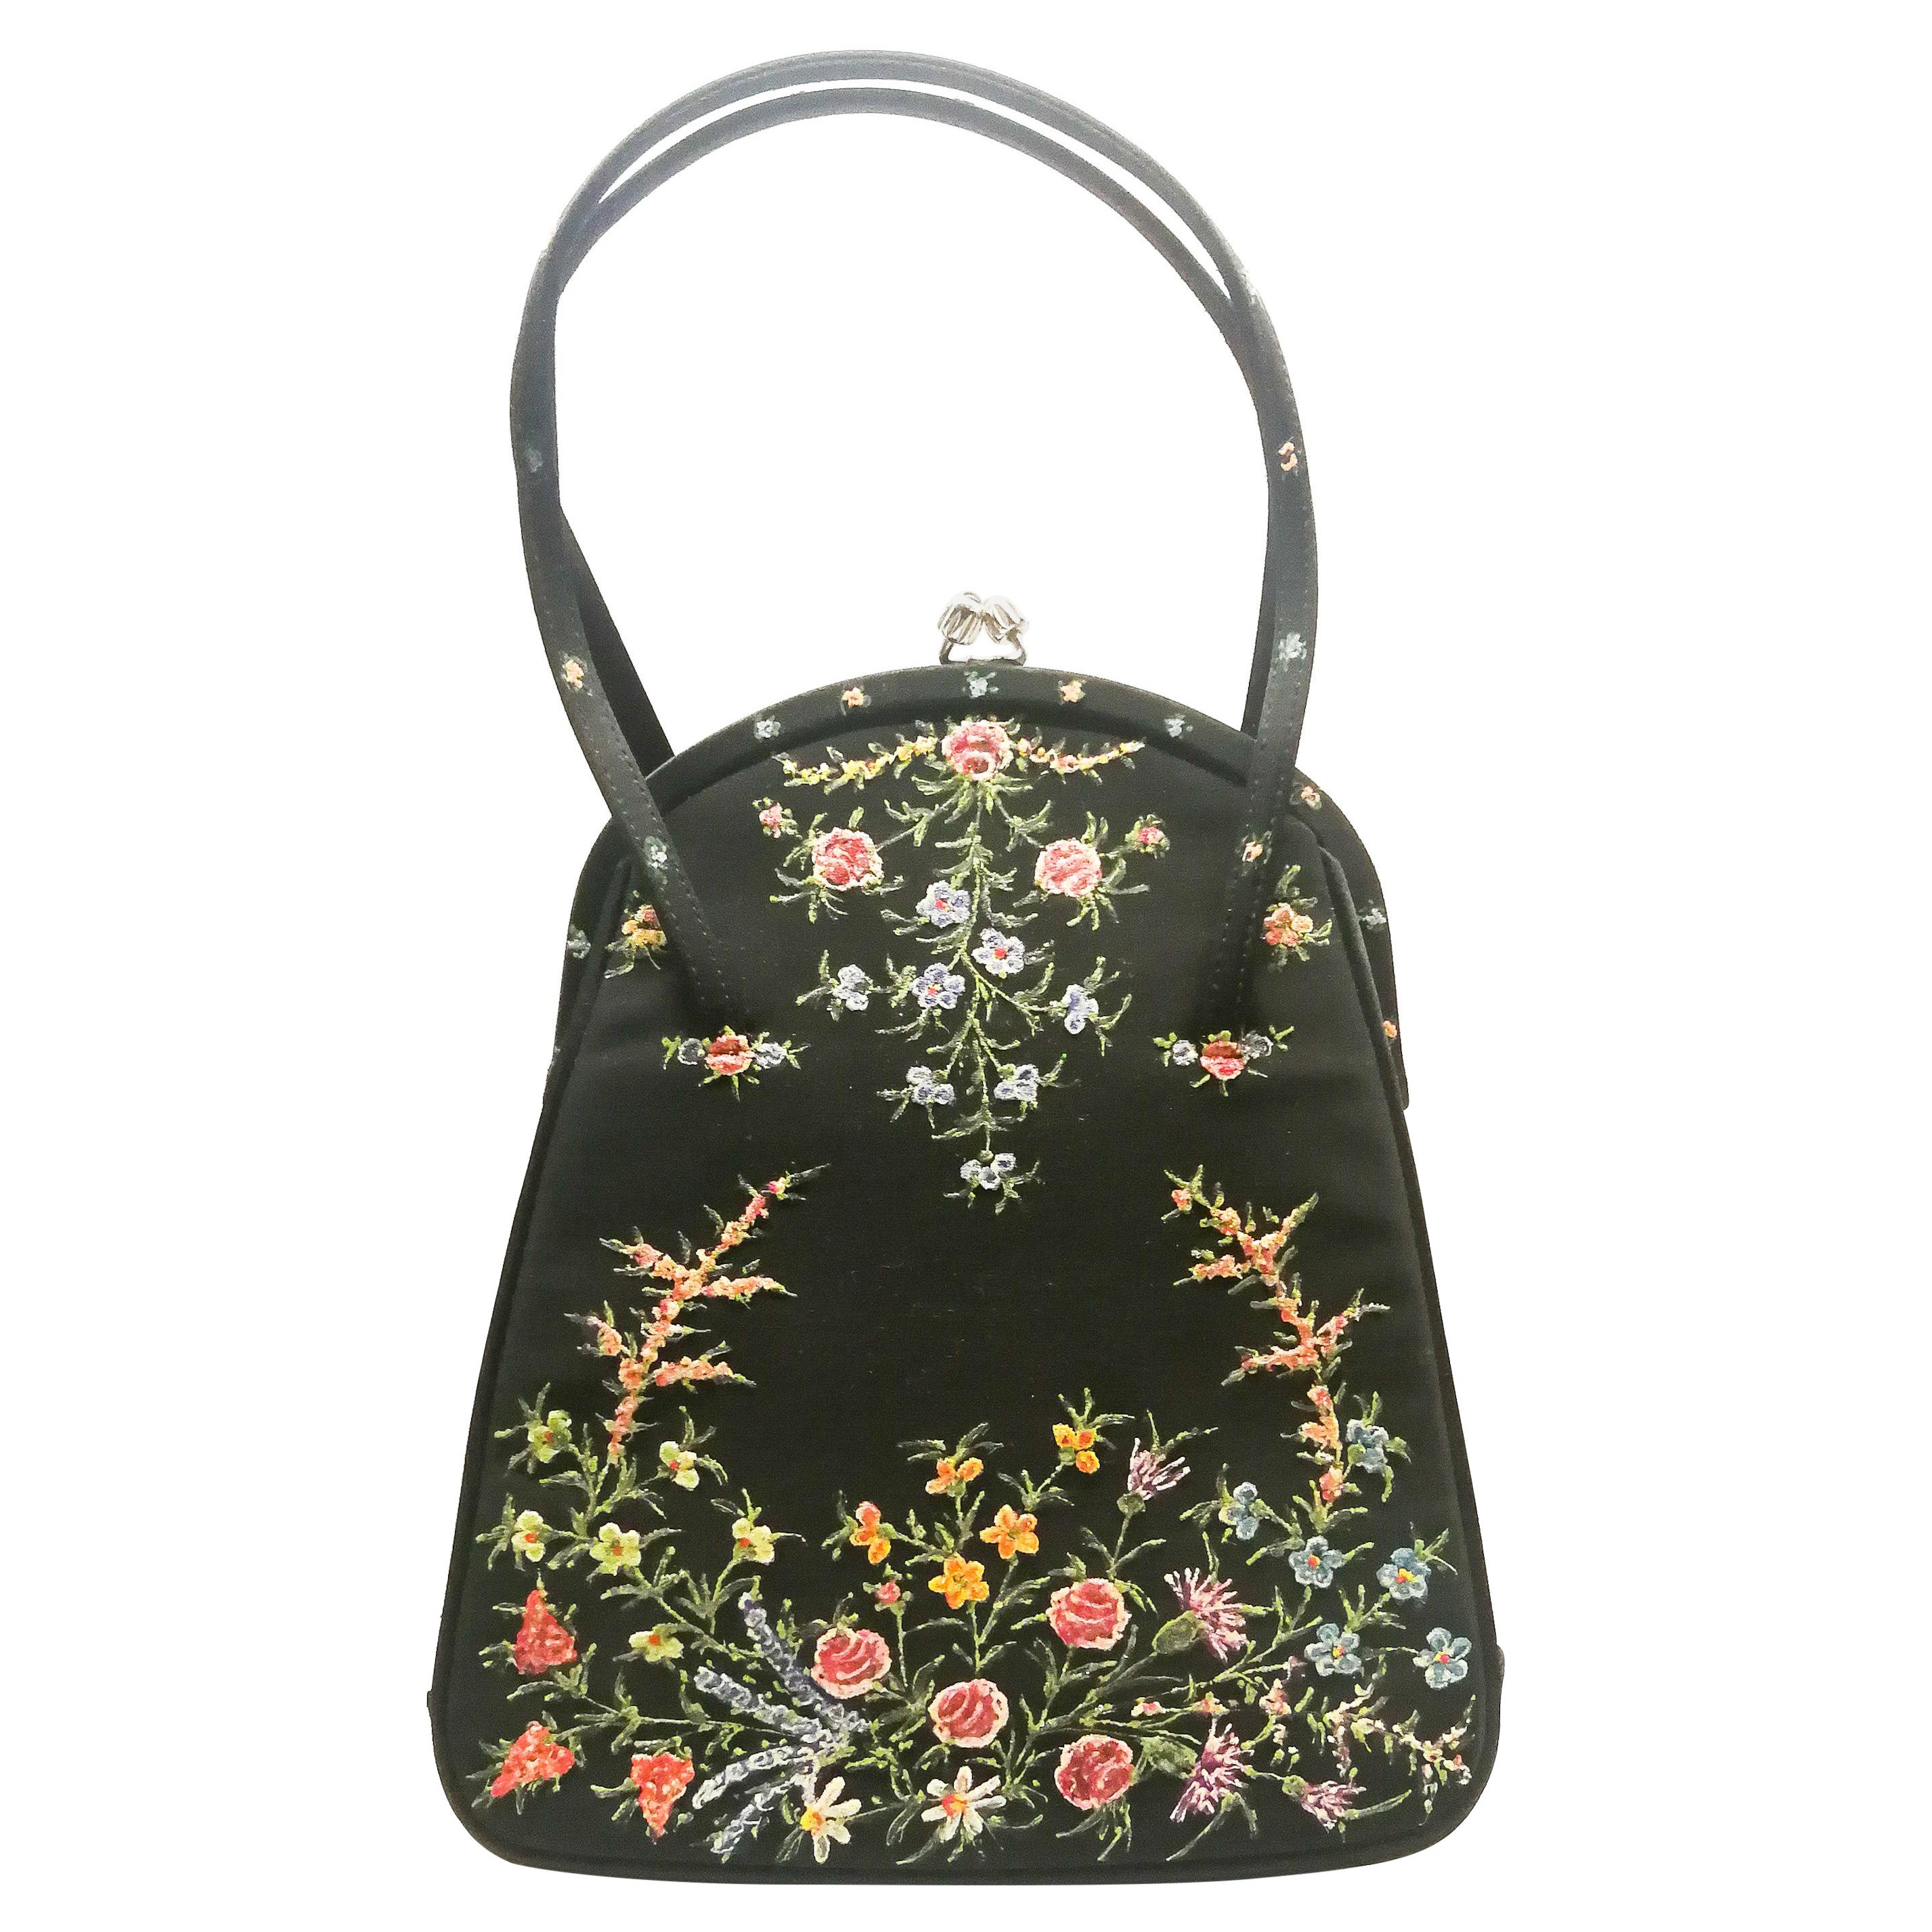 A black silk and glass hand painted floral design handbag, Waldybags, UK, 1950s